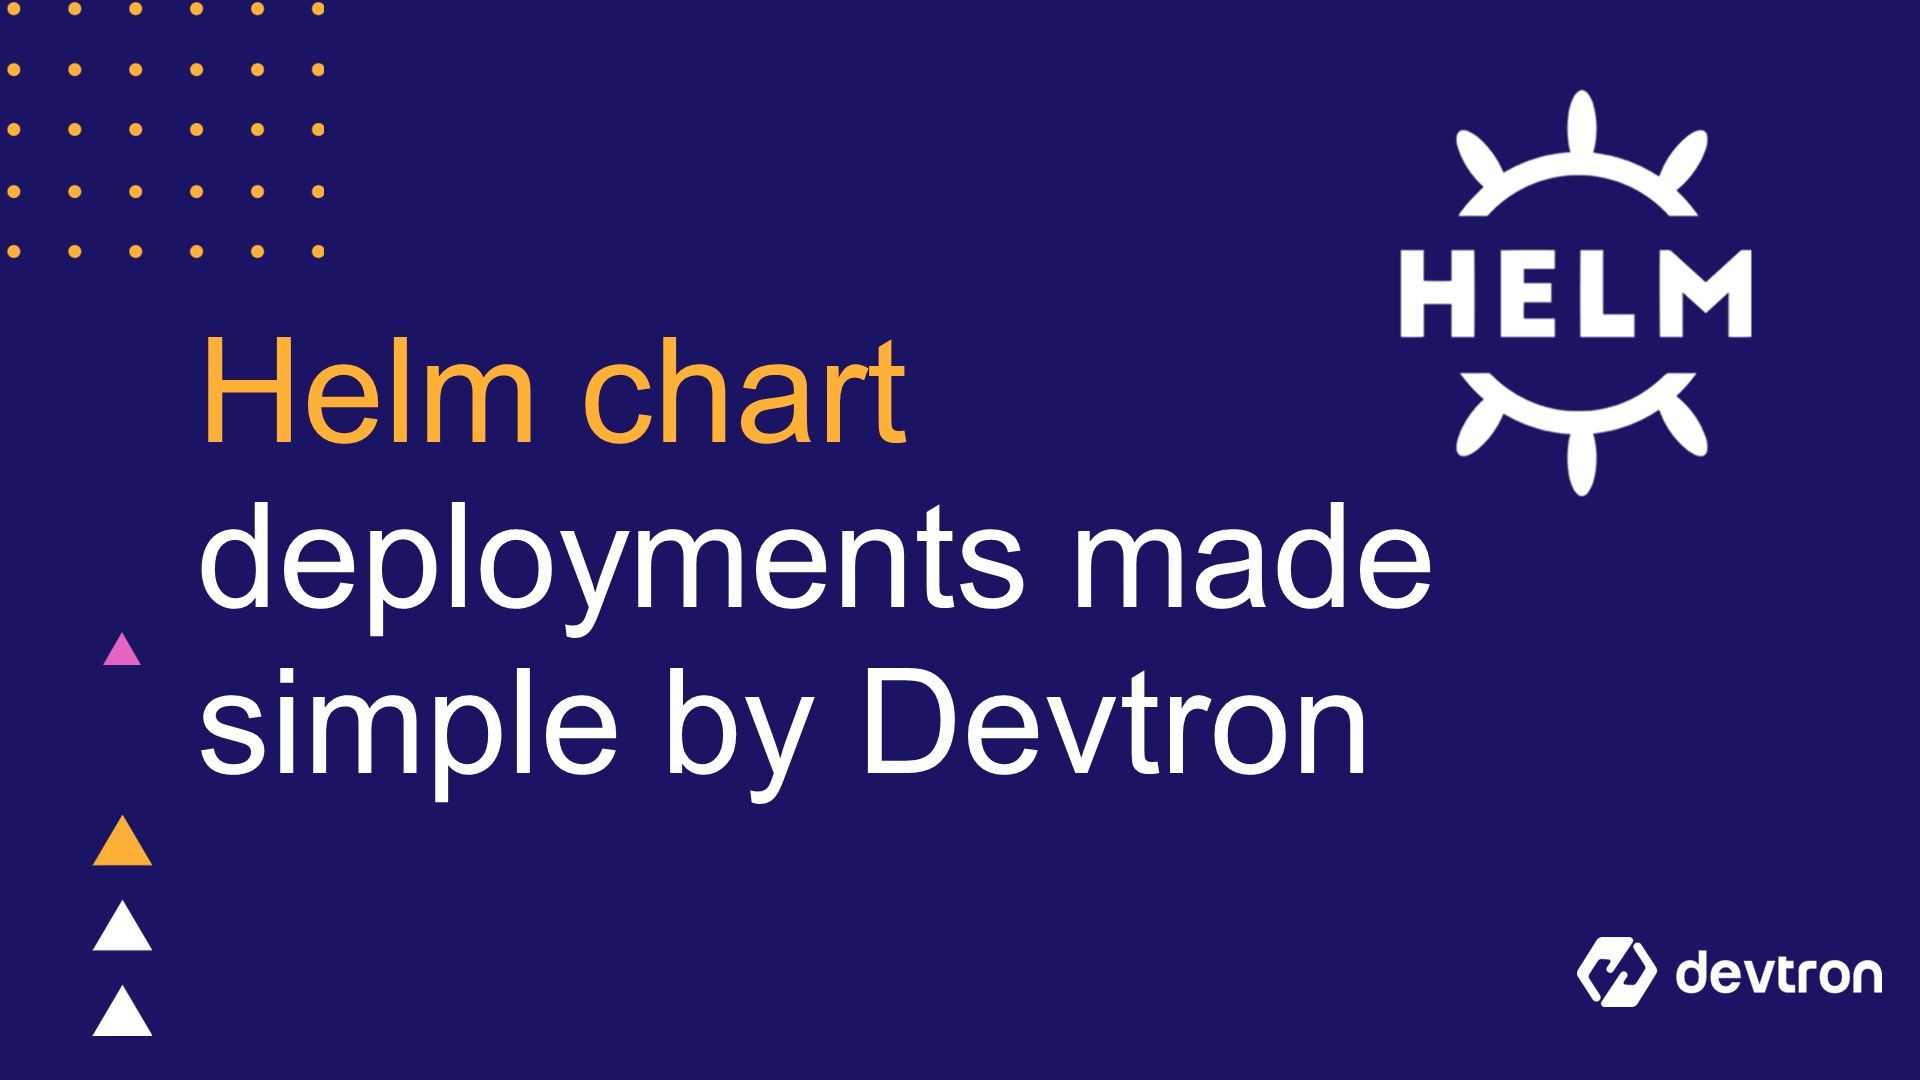 Helm chart deployments made simple by Devtron